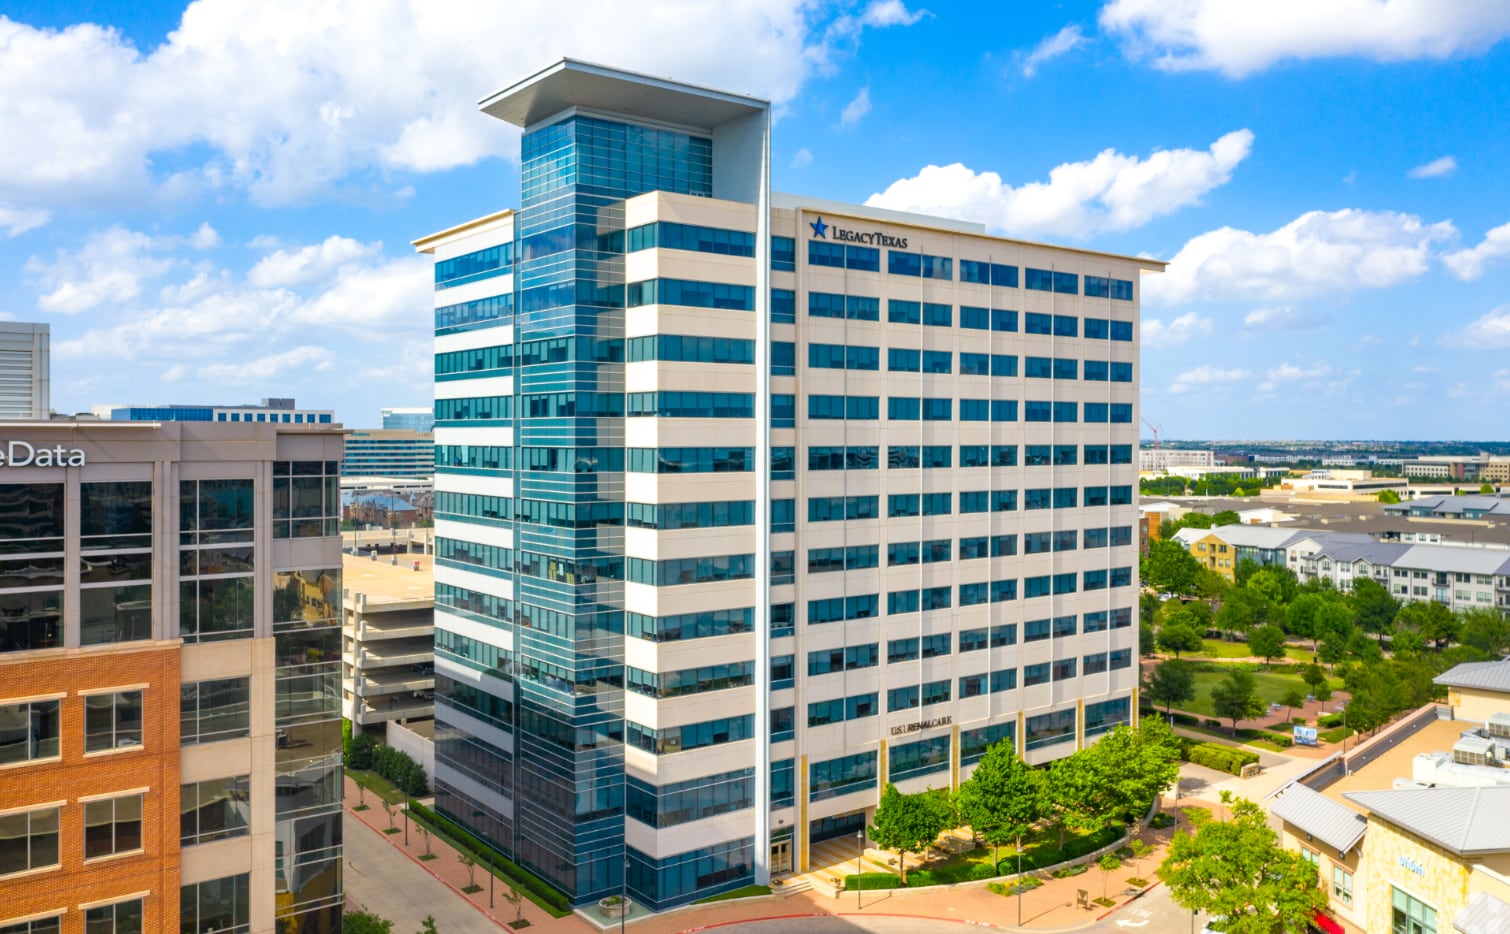 Energy firm Denbury Inc is moving to the Legacy Union One building in Plano.